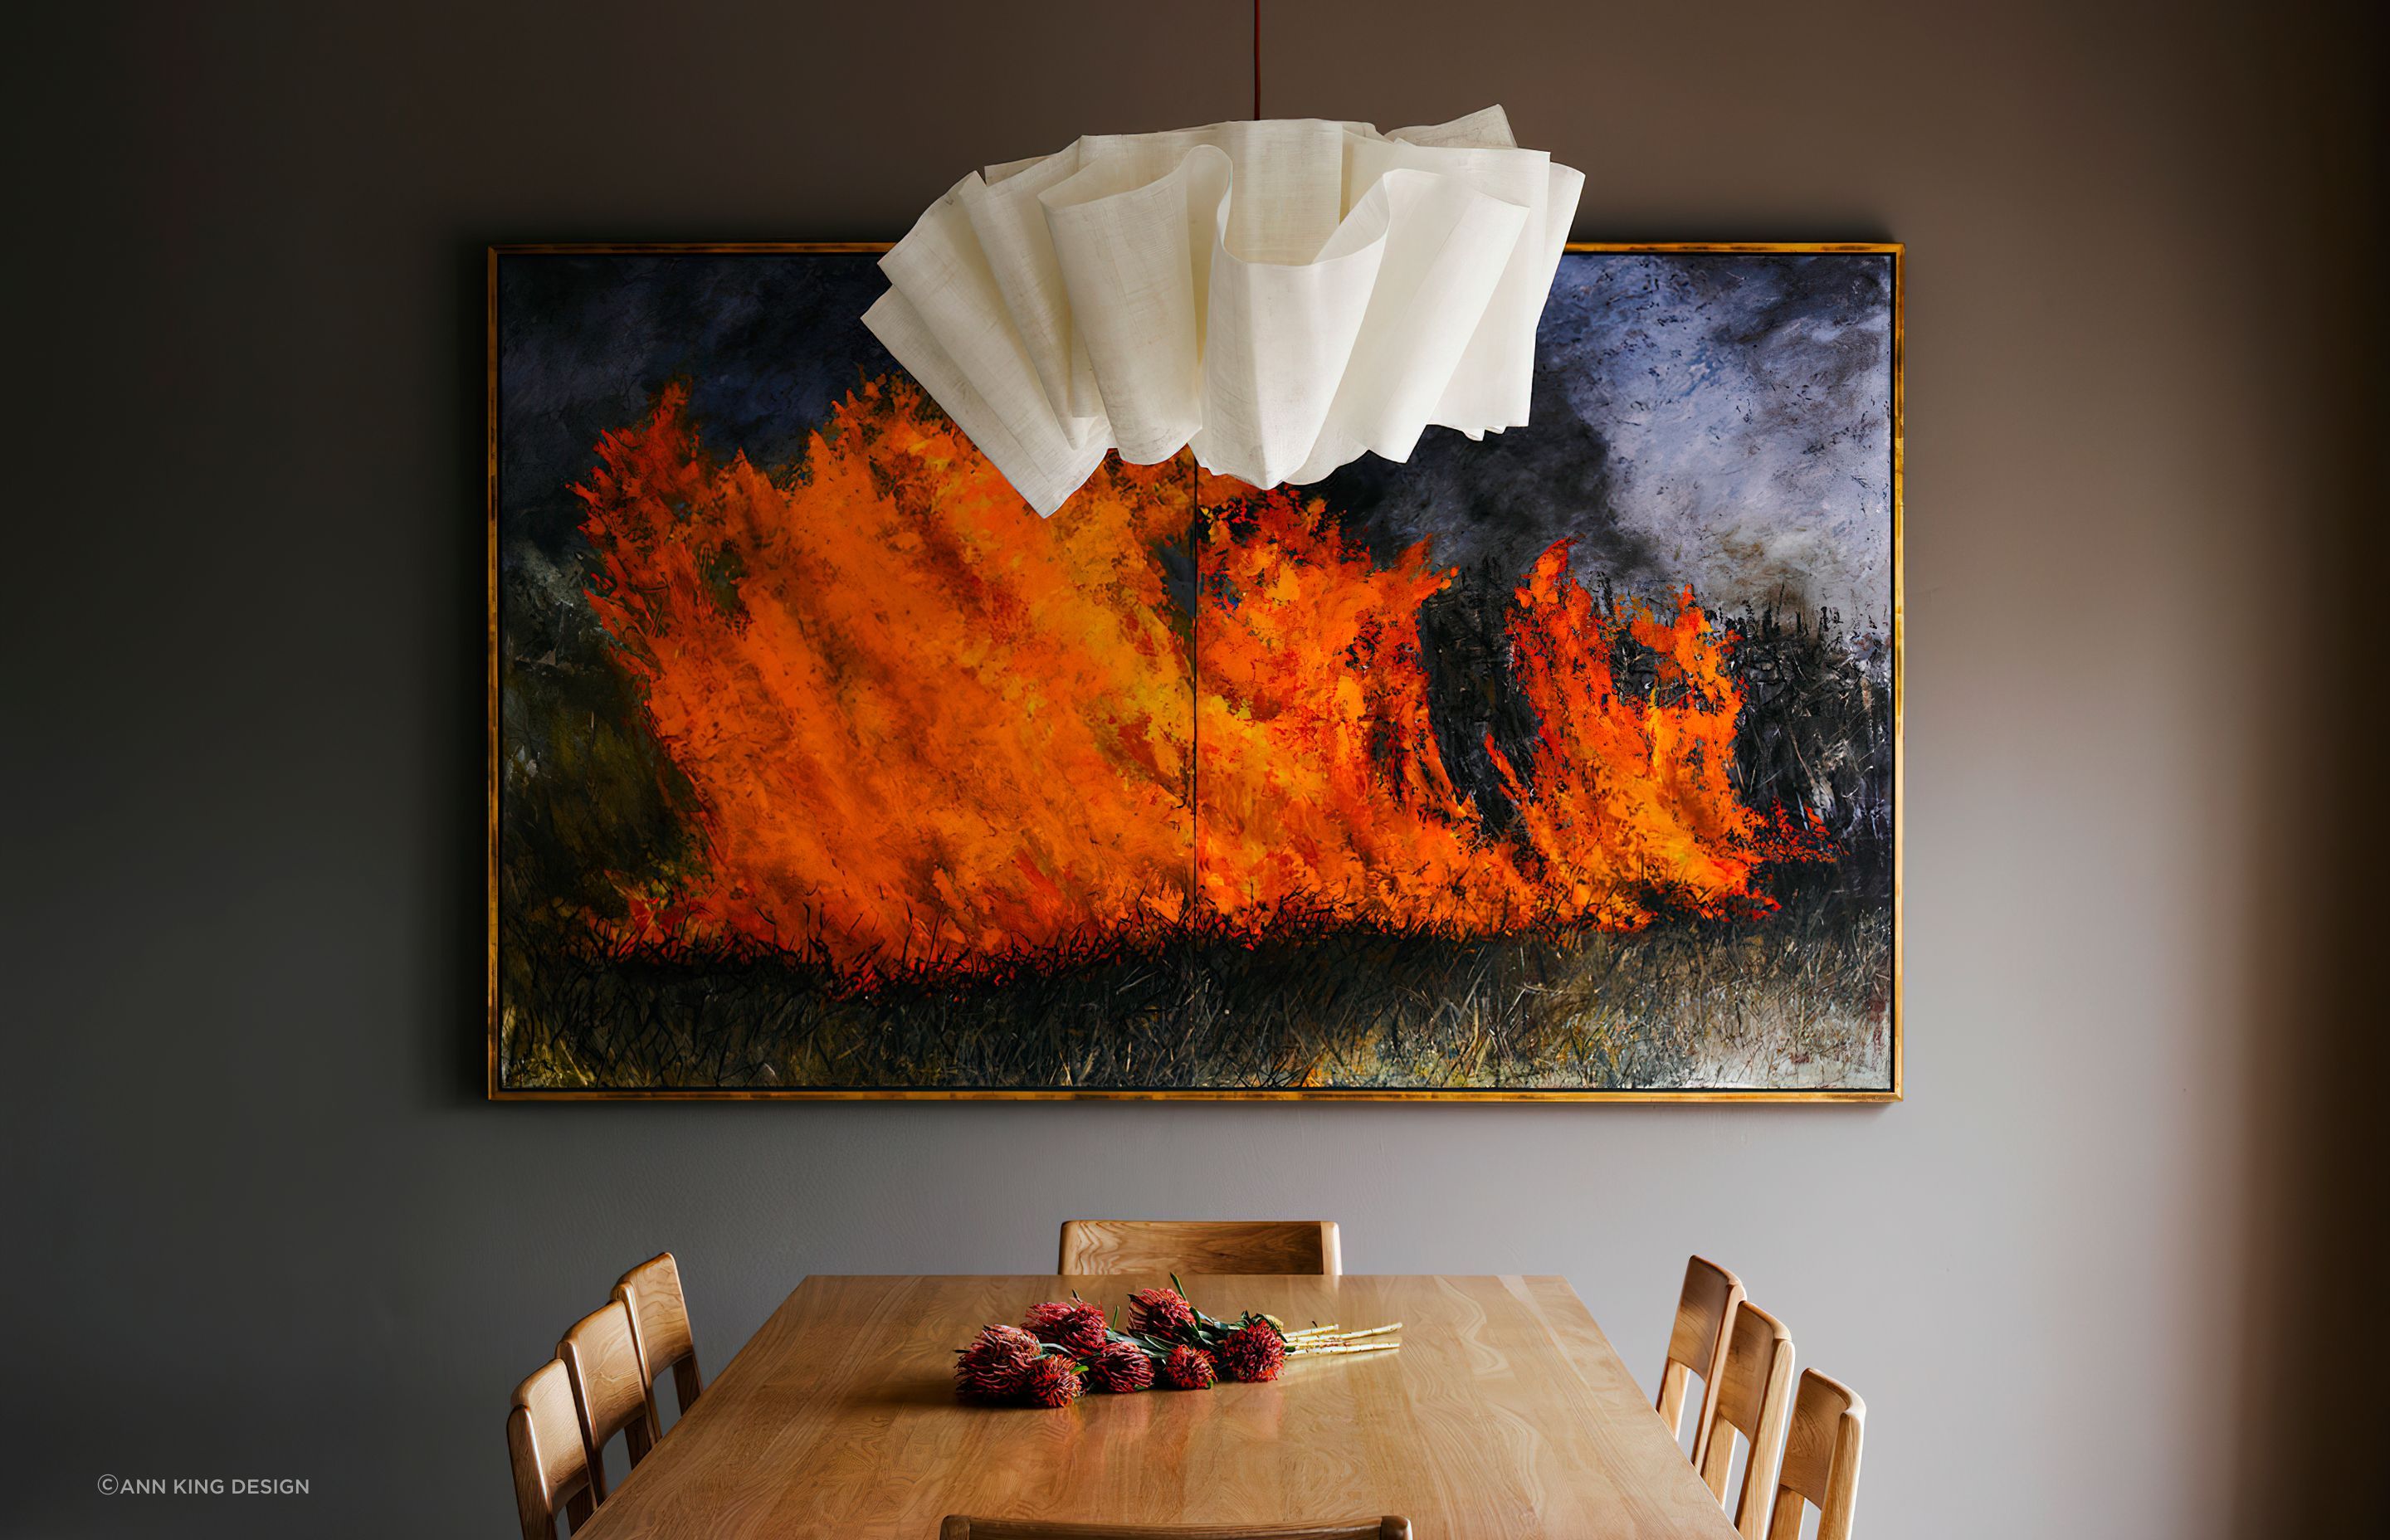 Striking wall art can brath life and emotion into a dining room.